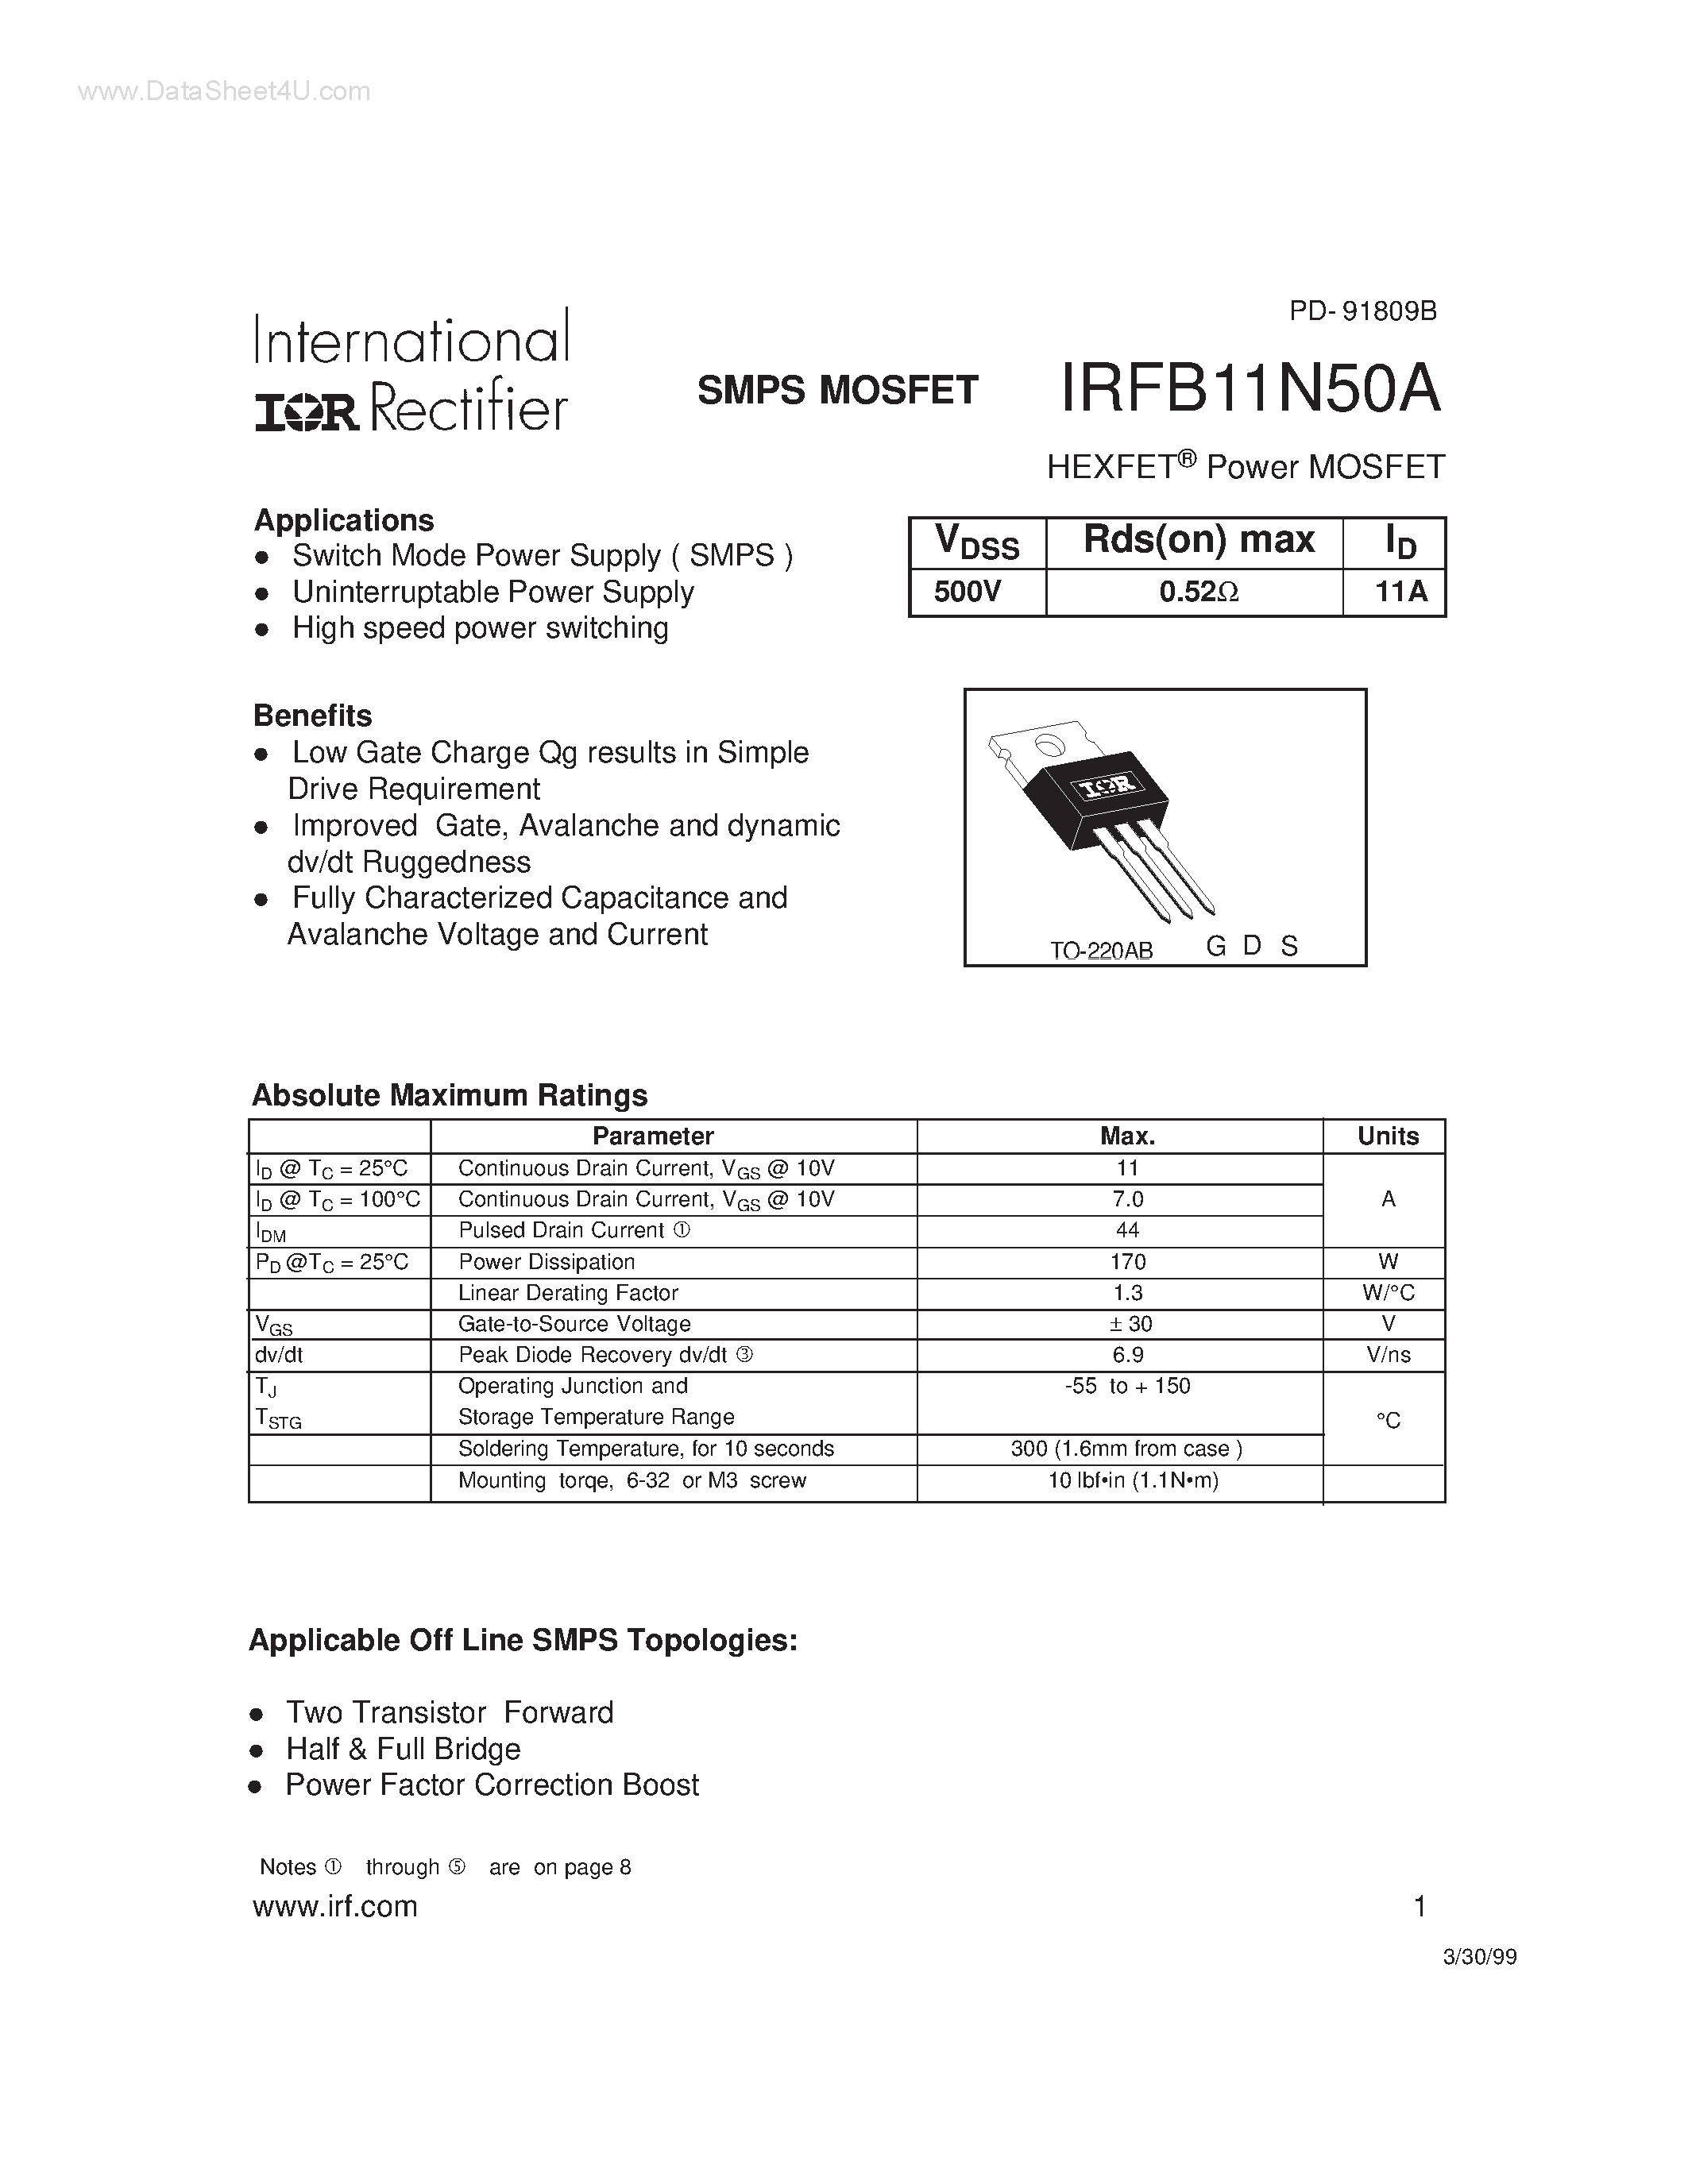 Datasheet FB11N50A - Search -----> IRFB11N50A page 1